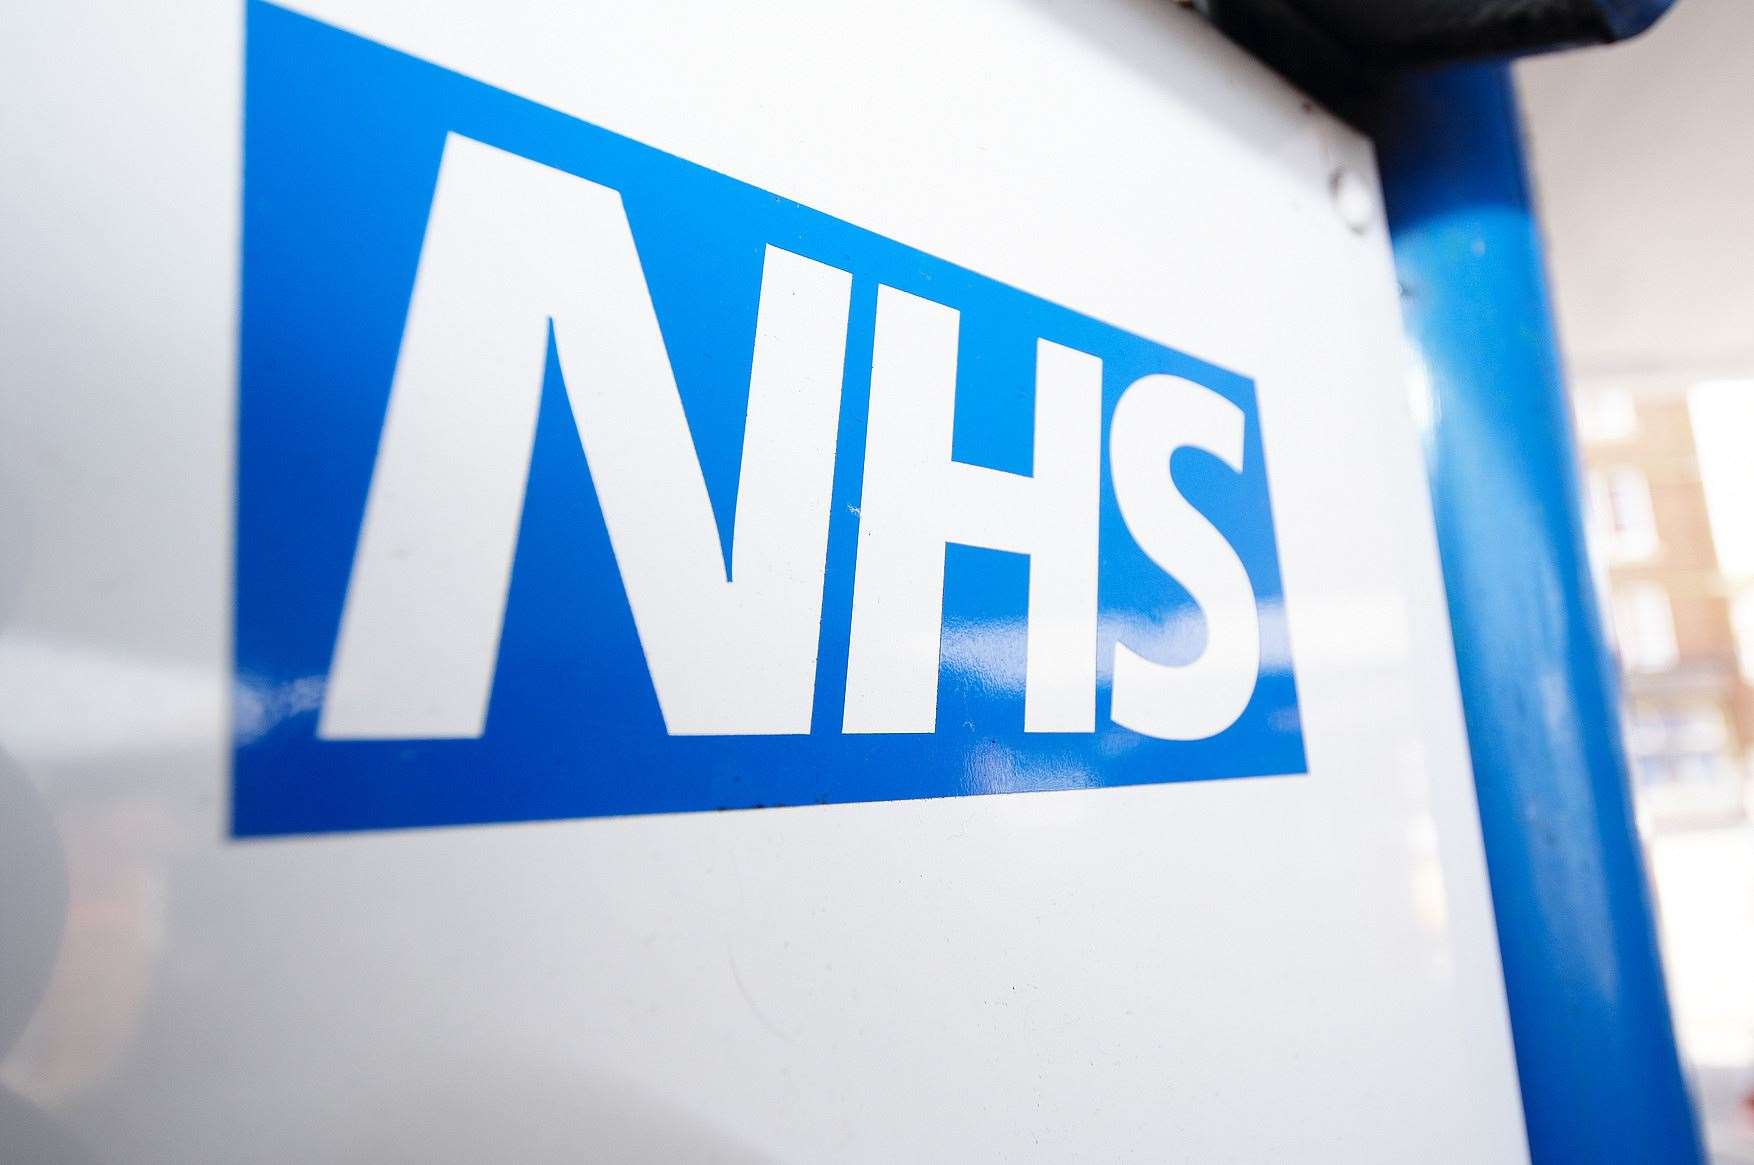 The NHS is reviewing autism services in Medway and has launched a survey for carers, families and patients